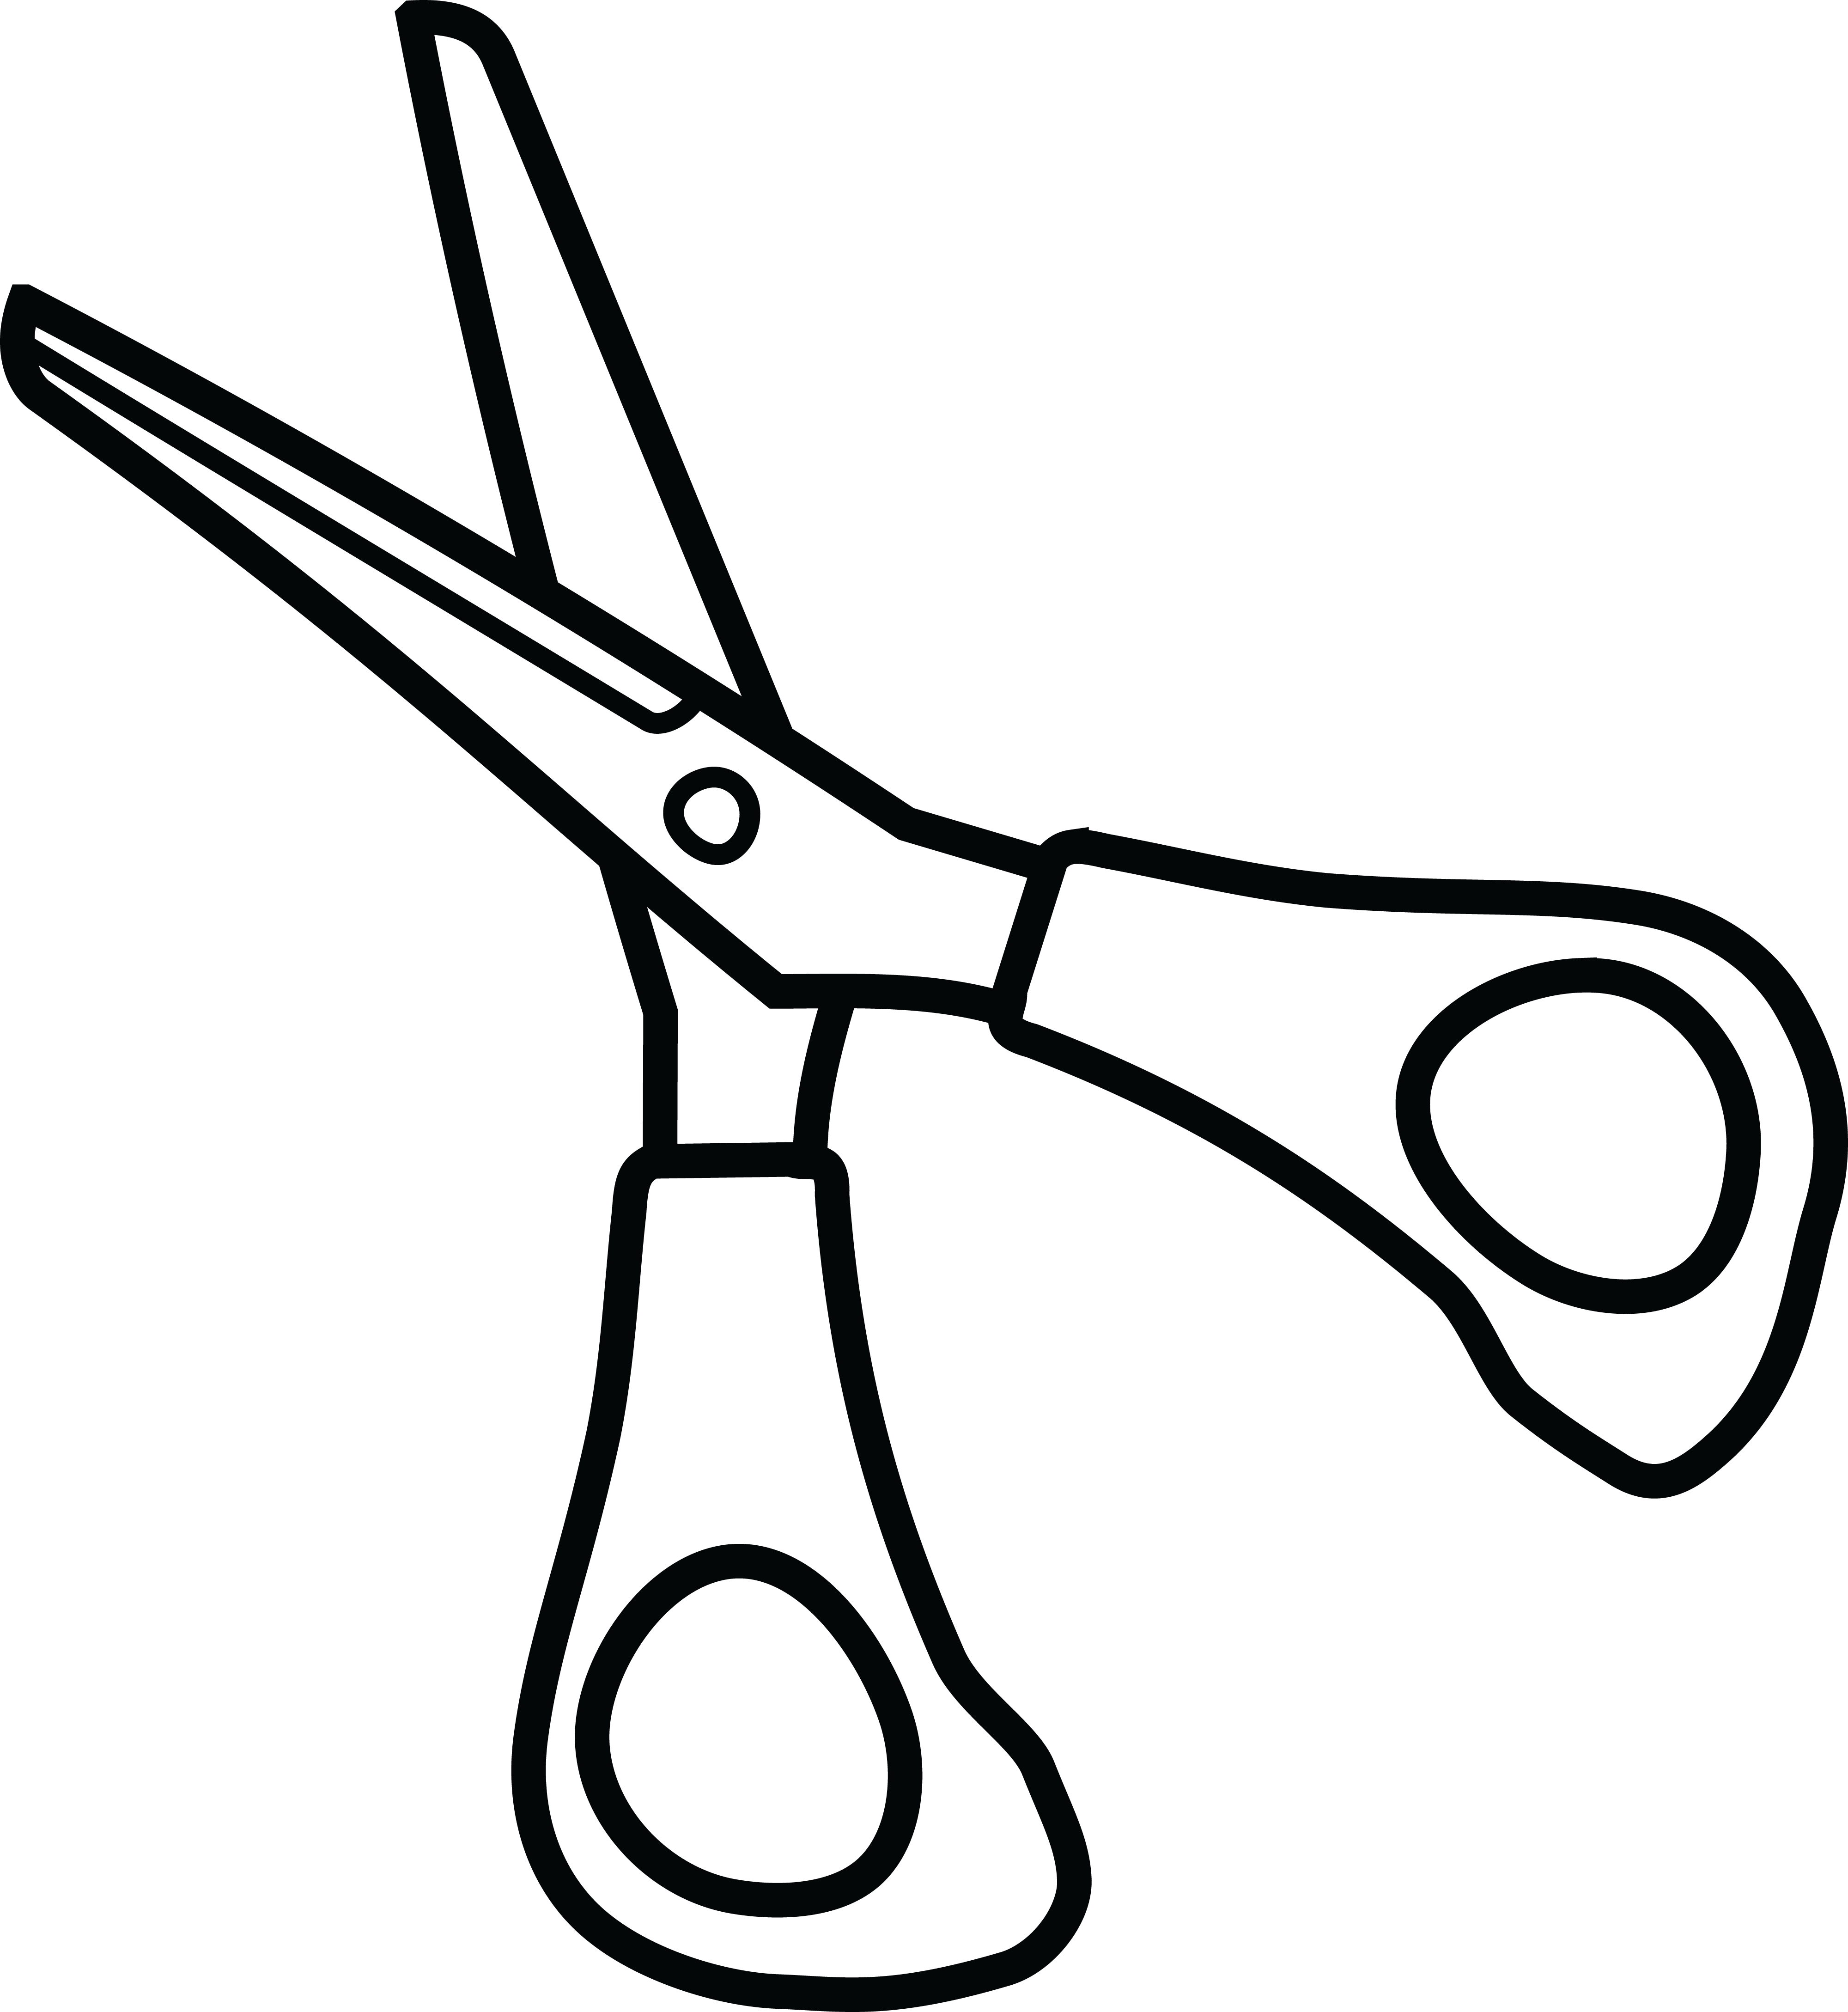 Free Clipart Of A Pair of scissors #00011230 .